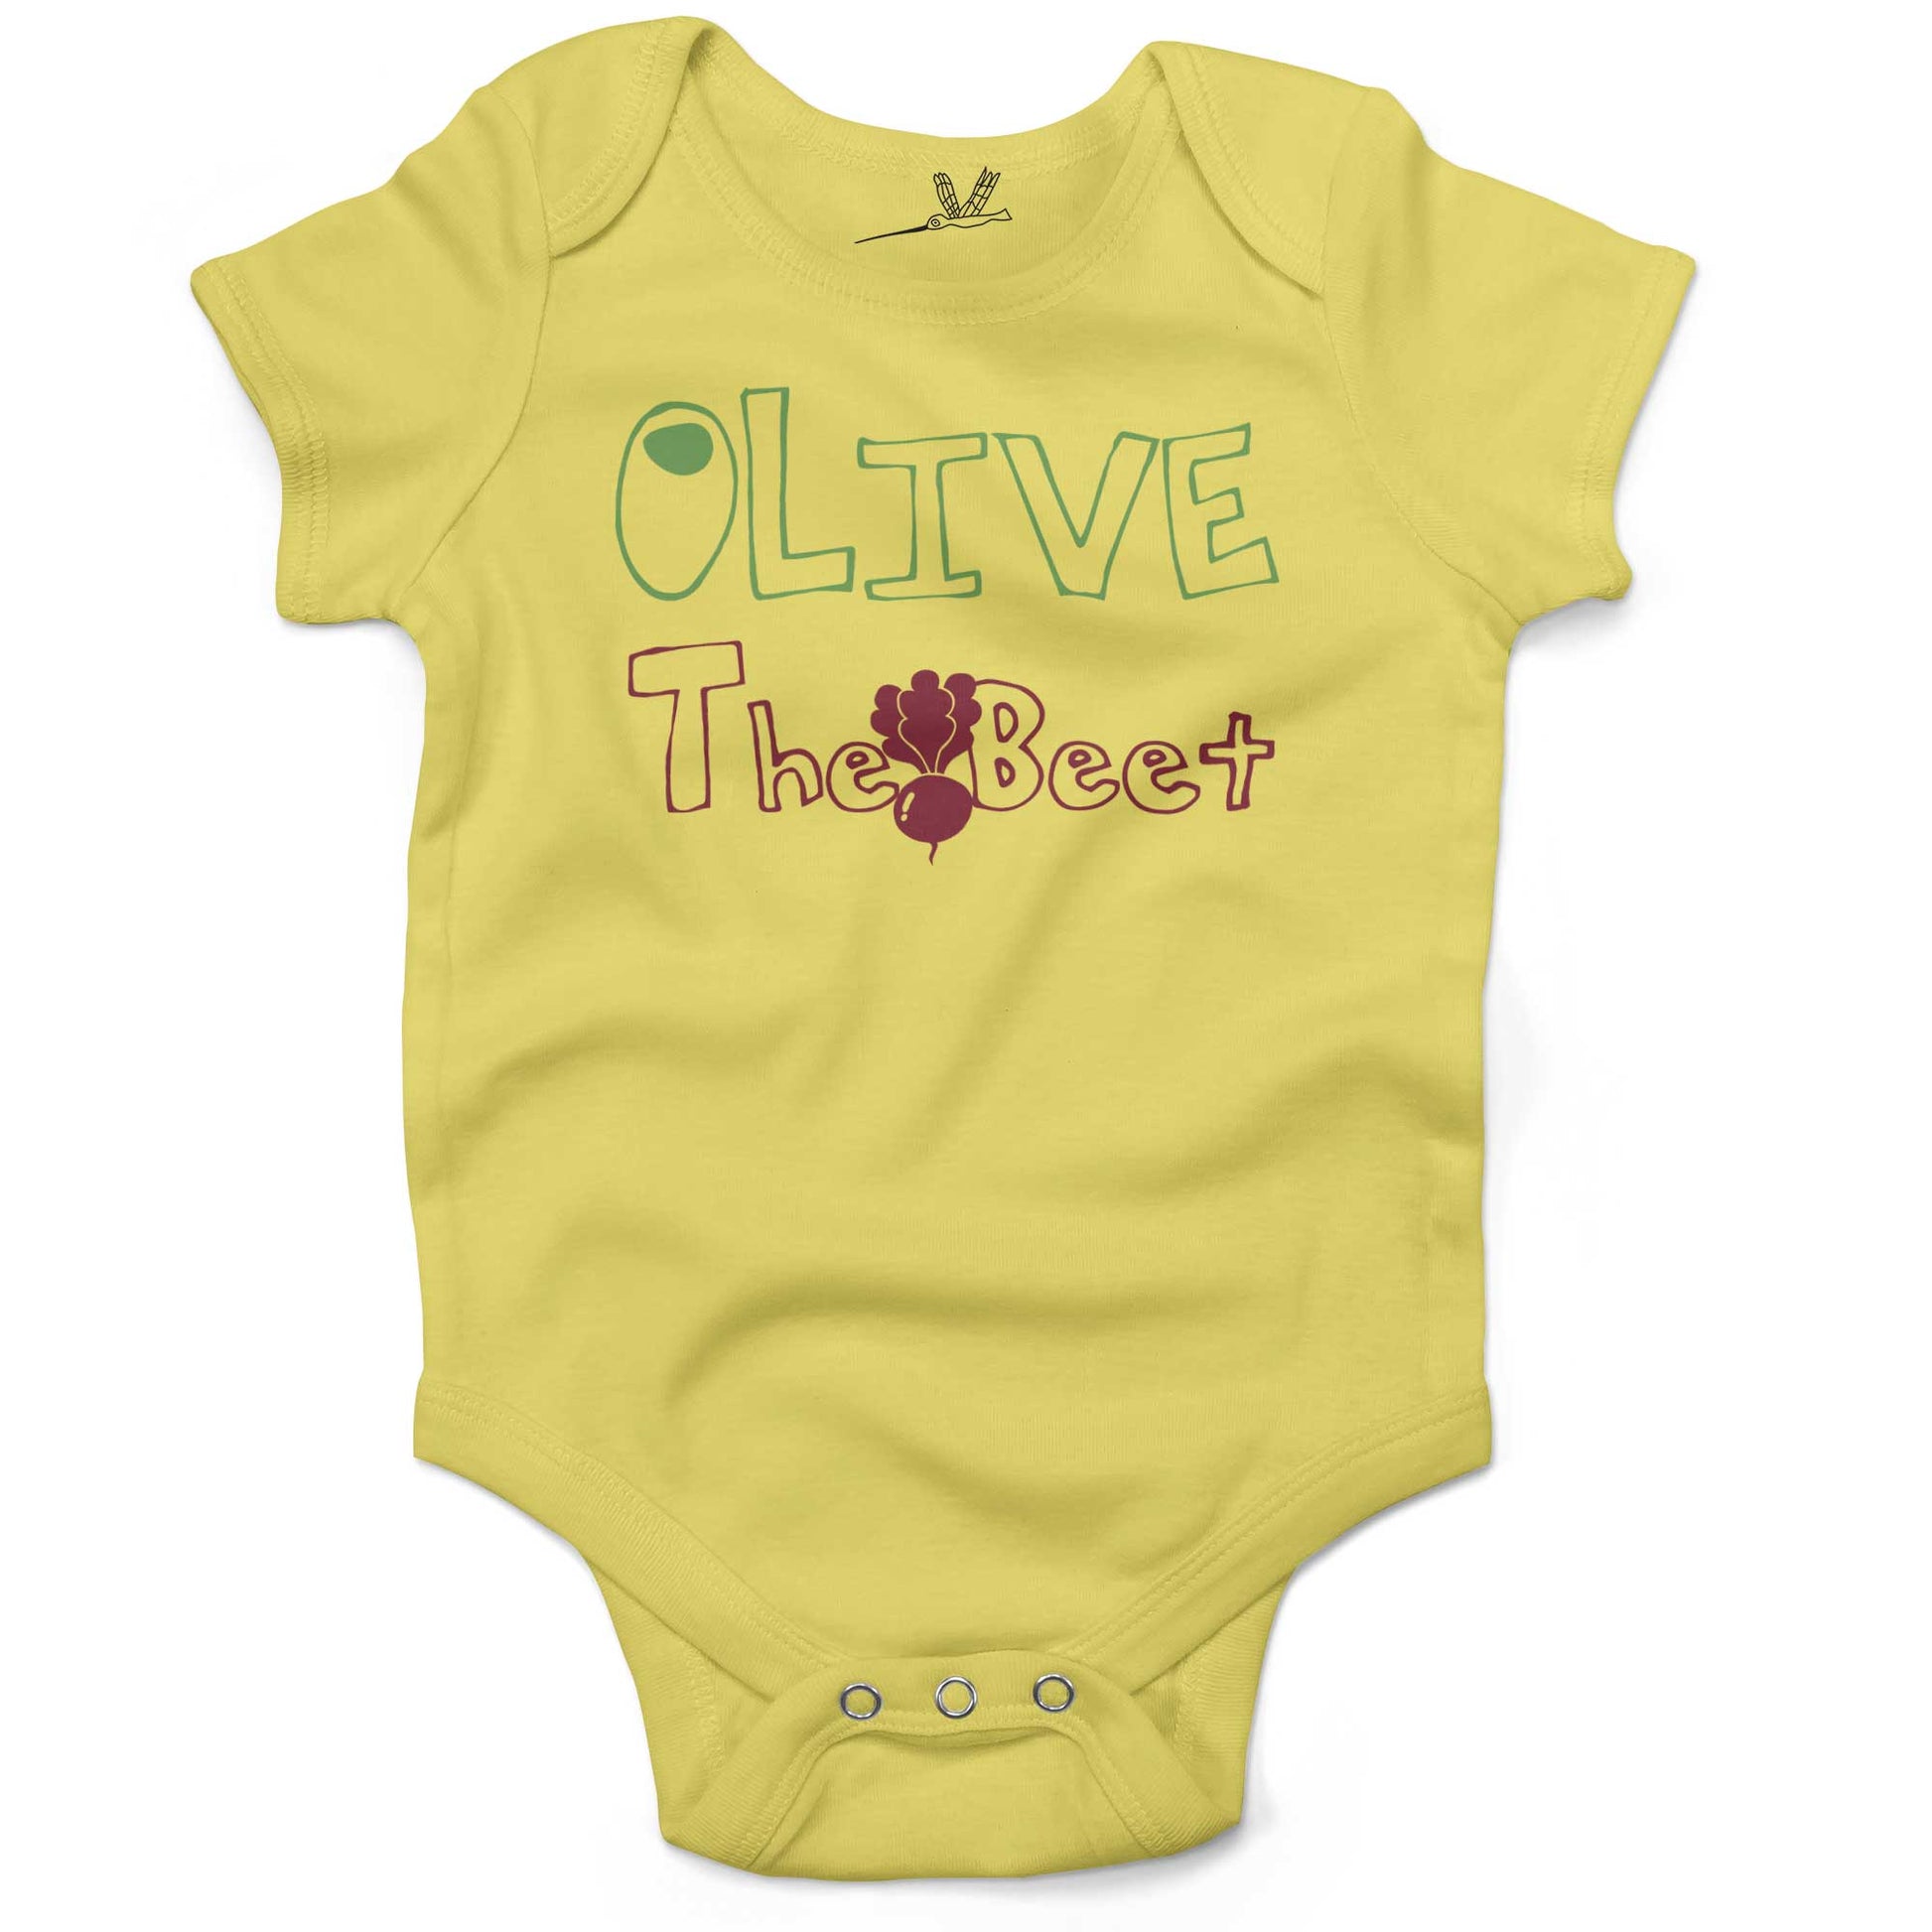 Olive The Beet Infant Bodysuit or Raglan Baby Tee-Yellow-3-6 months